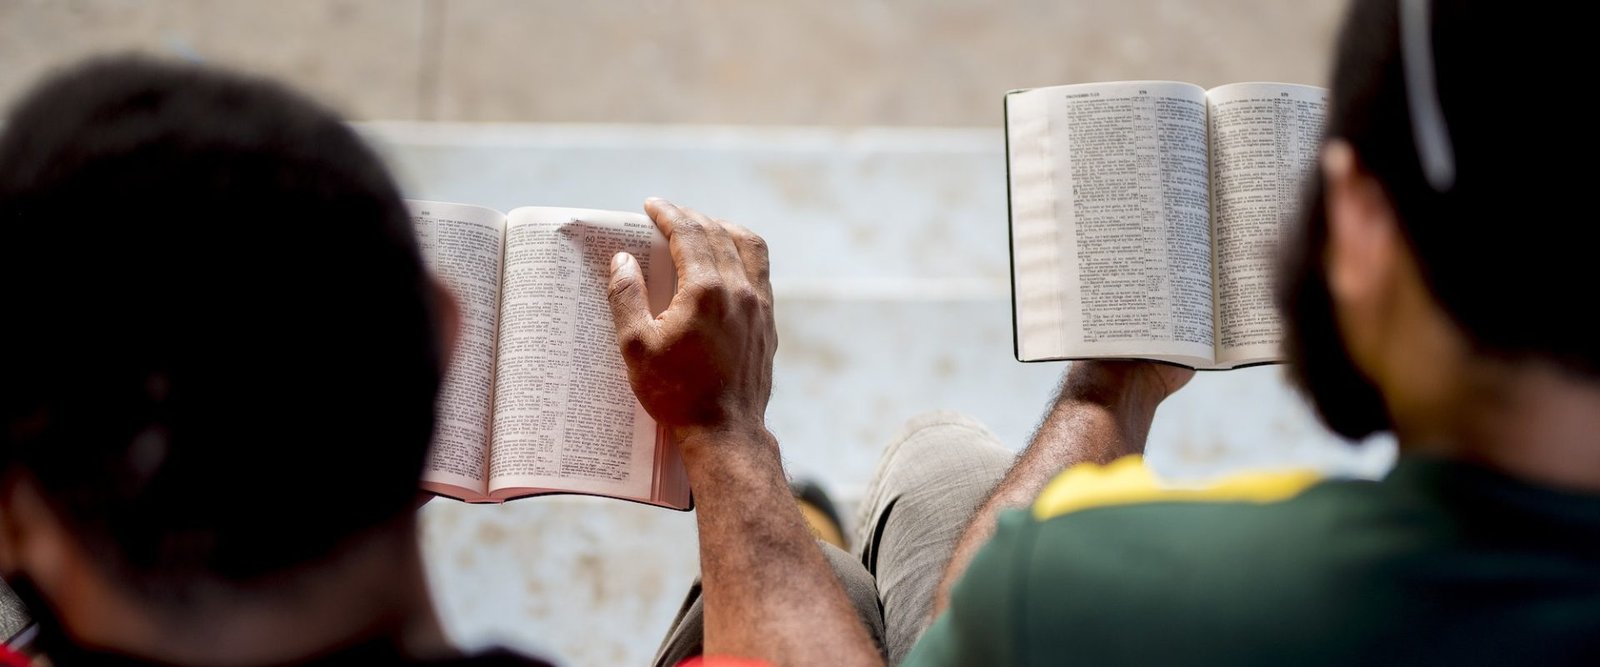 Overhead shot of people sitting and reading the bible with a blurred background